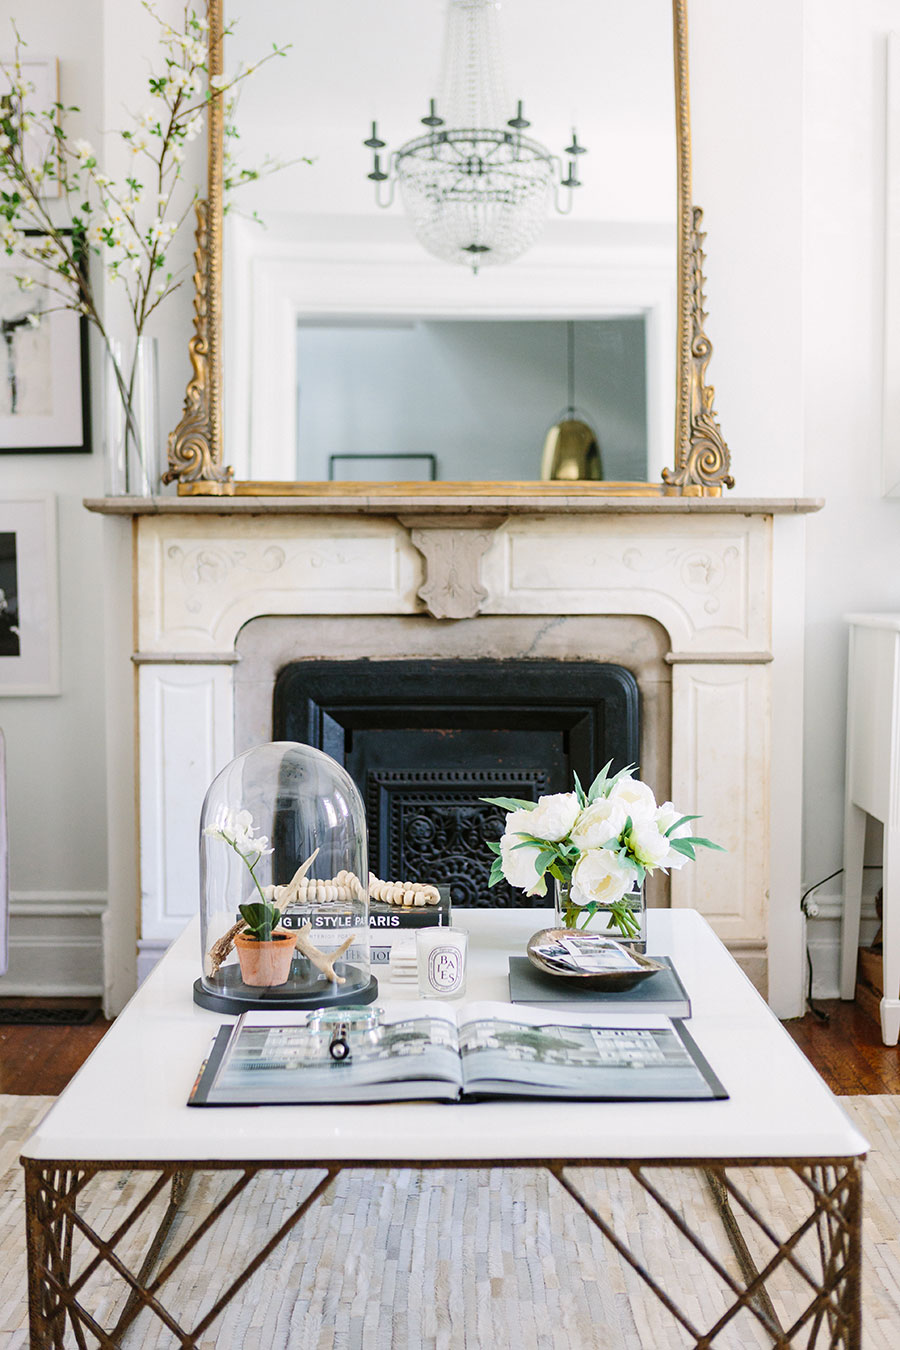 10 of the Most Beautiful Coffee Table Books for Your Home